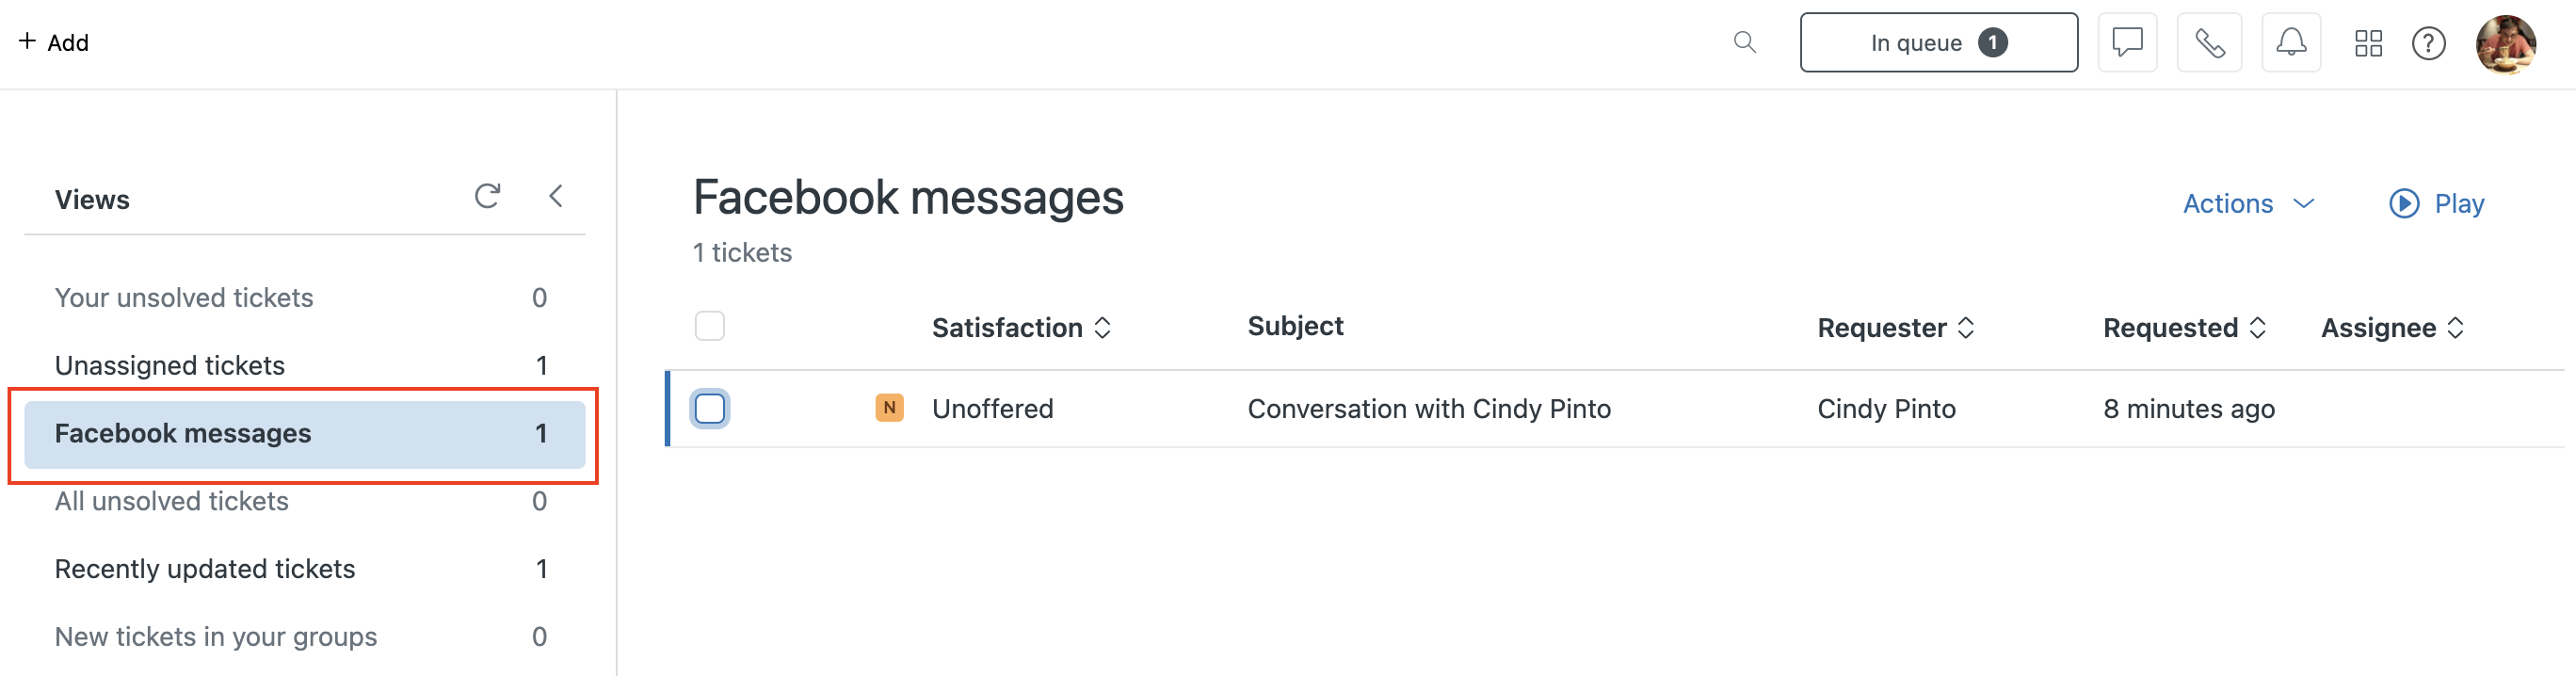 Private messages from Facebook in Zendesk